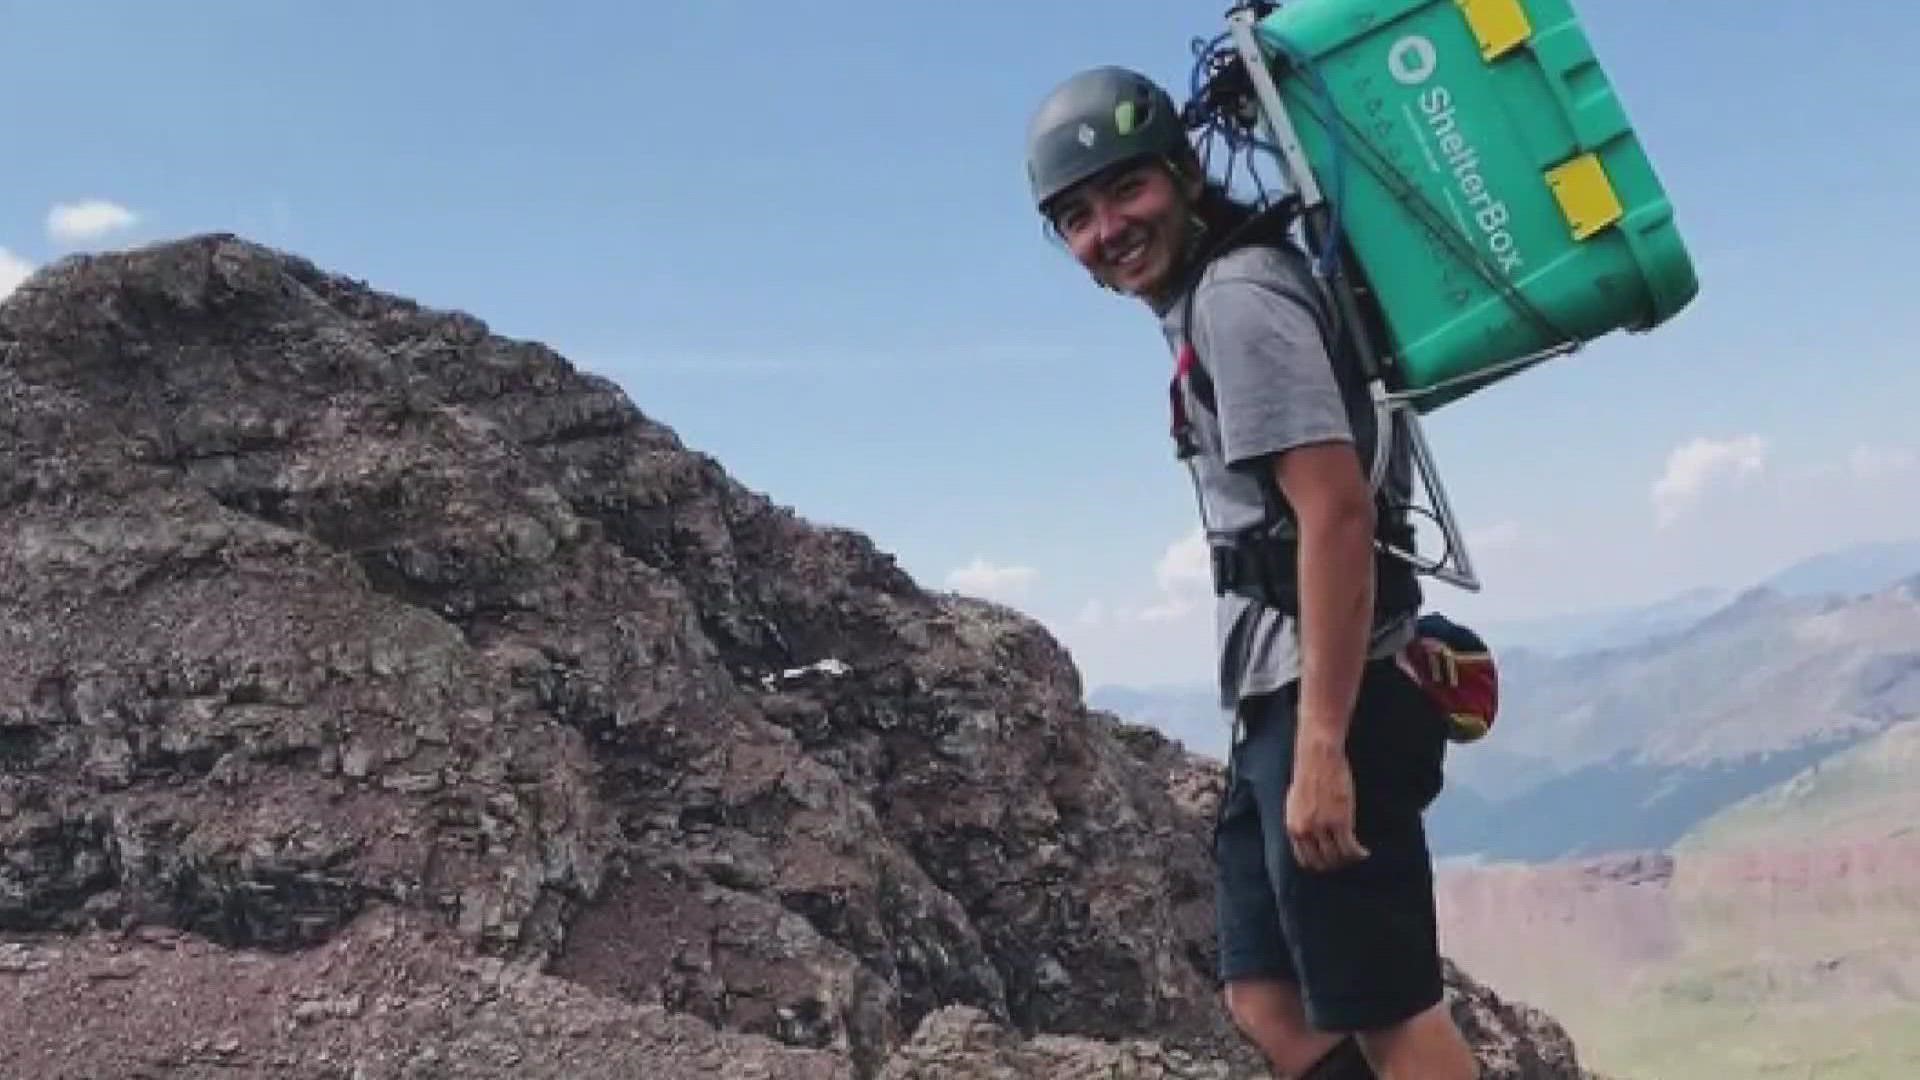 Chase Harr hadn't even heard of the charity Shelterbox a year ago. Now he's hiked more than 300 miles over 67 peaks to raise money for non-profit.